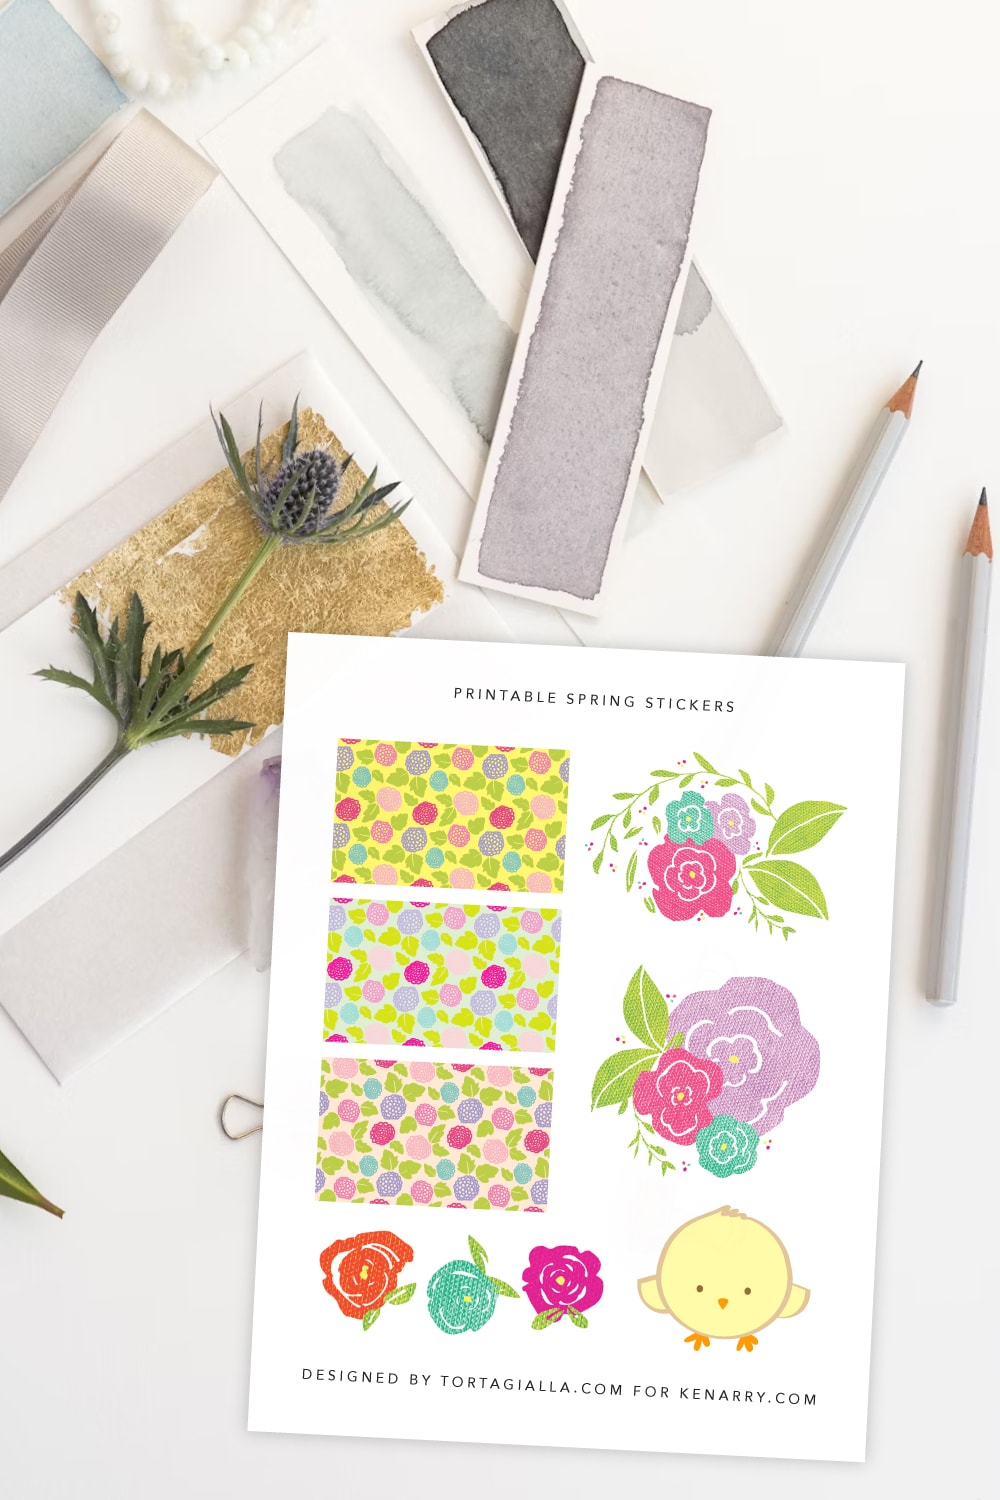 Preview of spring stickers printable page on top of a white desk with paint swatches on white papers, pencils and a lavender stem o the right. 